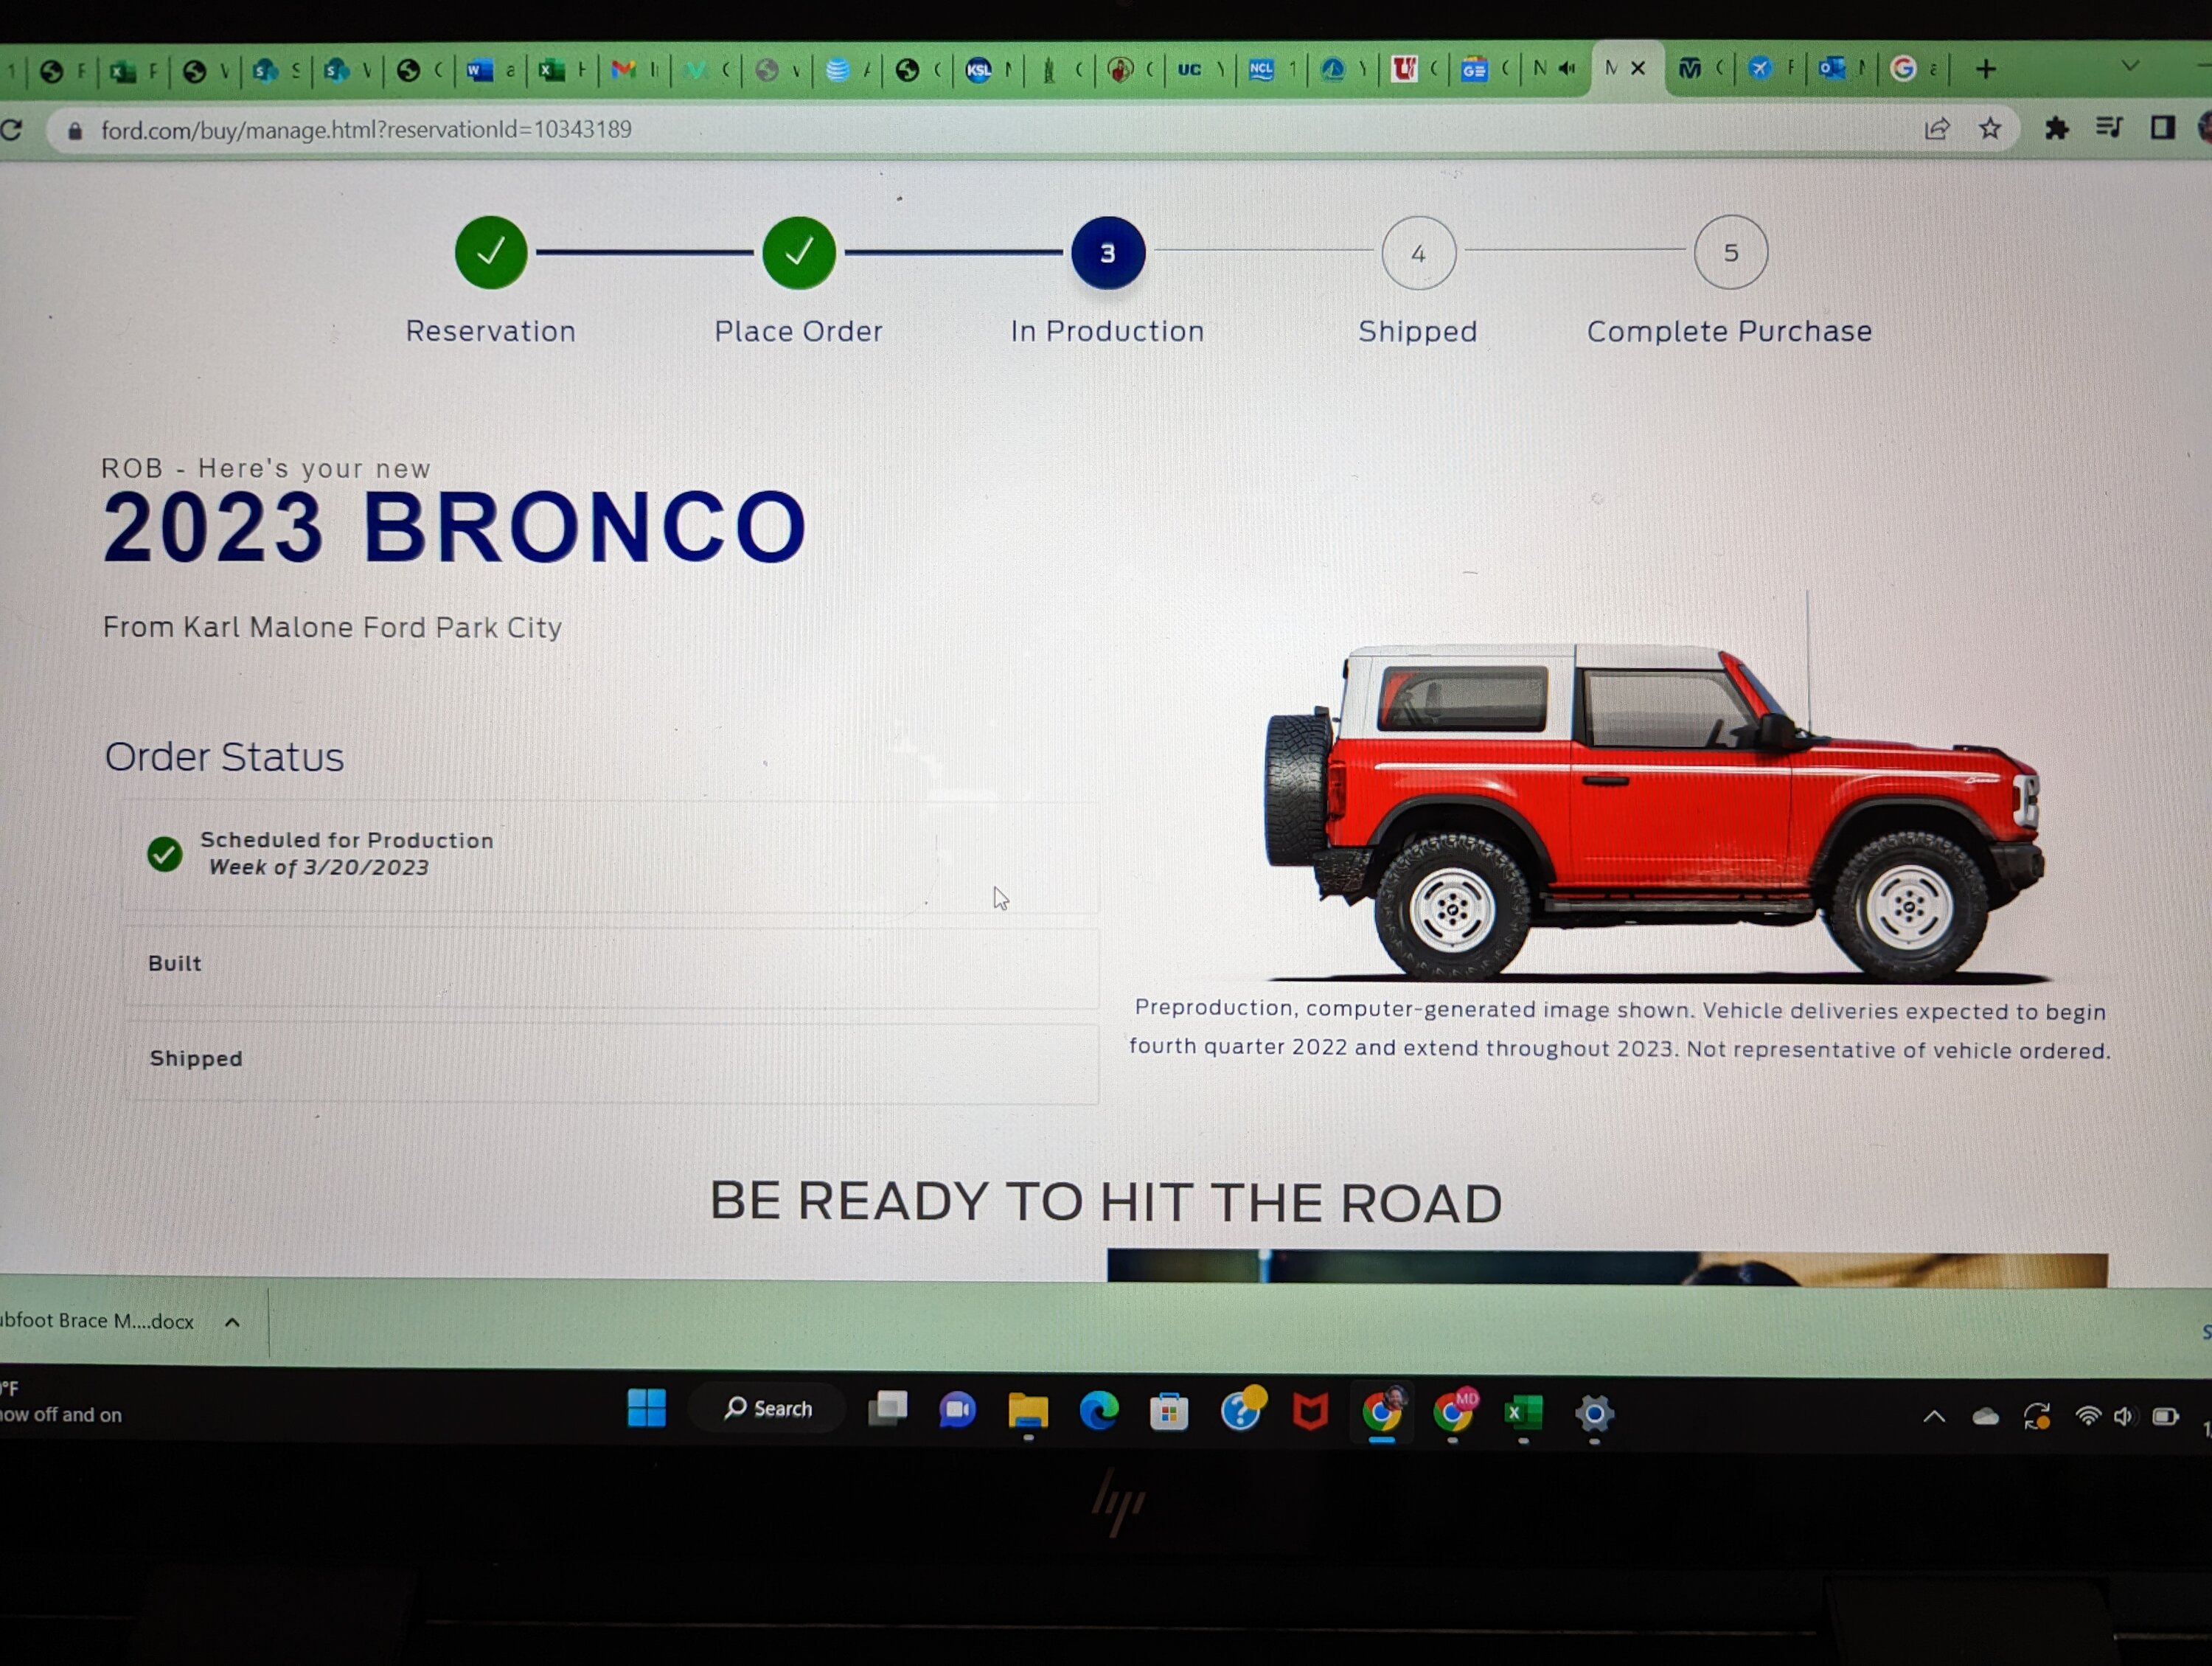 Ford Bronco SCHEDULED Heritage 2 Door Manual. Literally can't believe it PXL_20230119_182136123